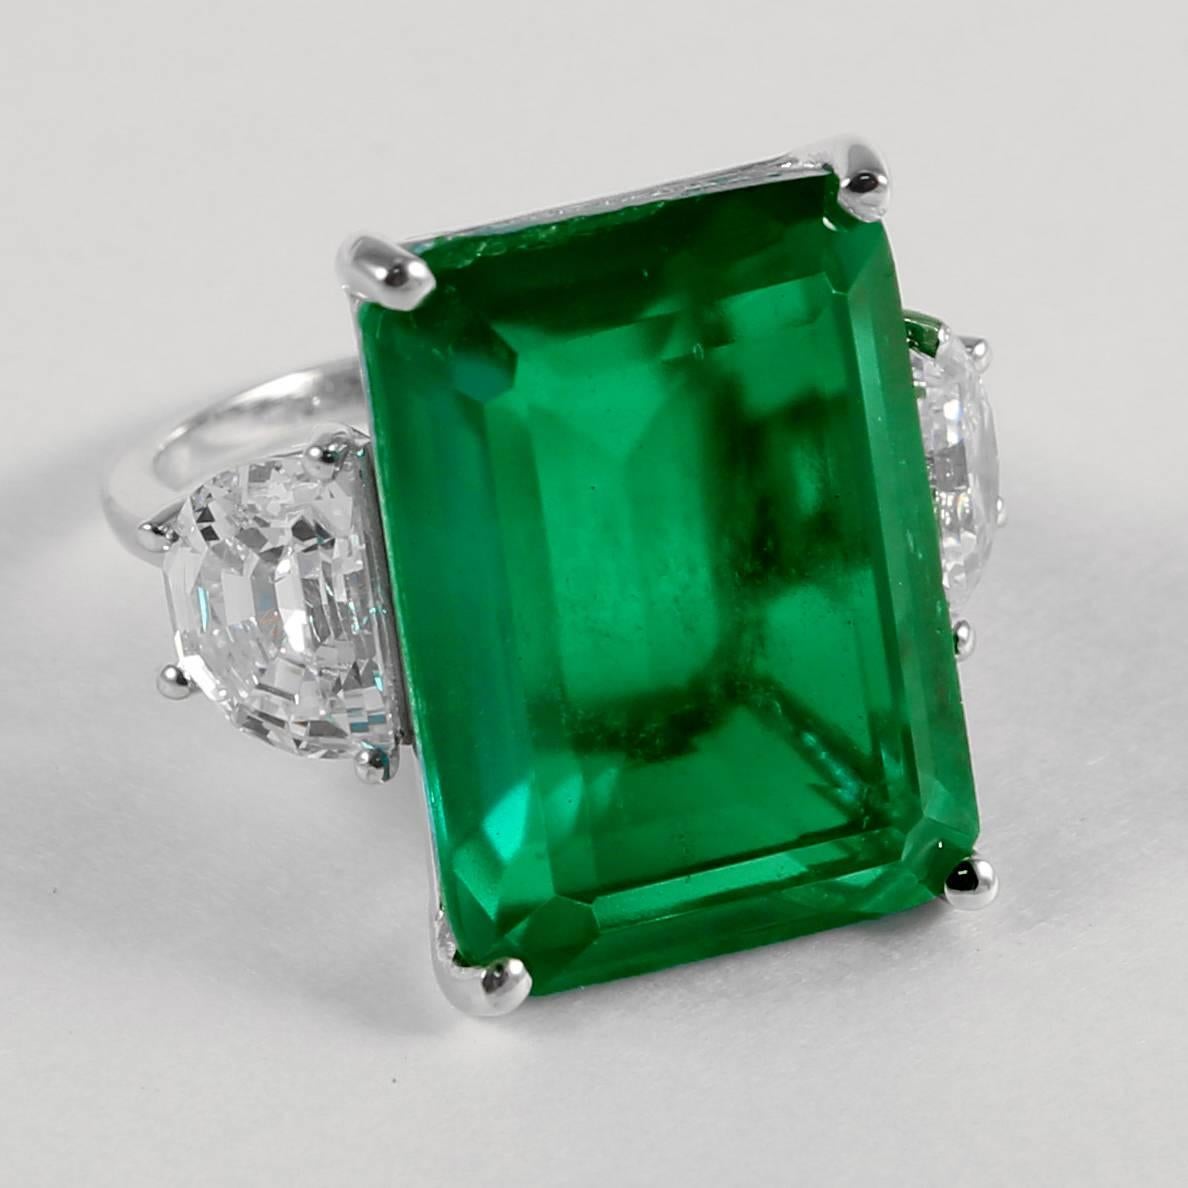 Magnificent Costume Jewelry  Amazing faux 25 carat rectangular step cut man-made emerald made of the finest green 
natural material faux emerald set with half moons either side in white gold. This ring has an amazing warm glow. Measures 1inch long